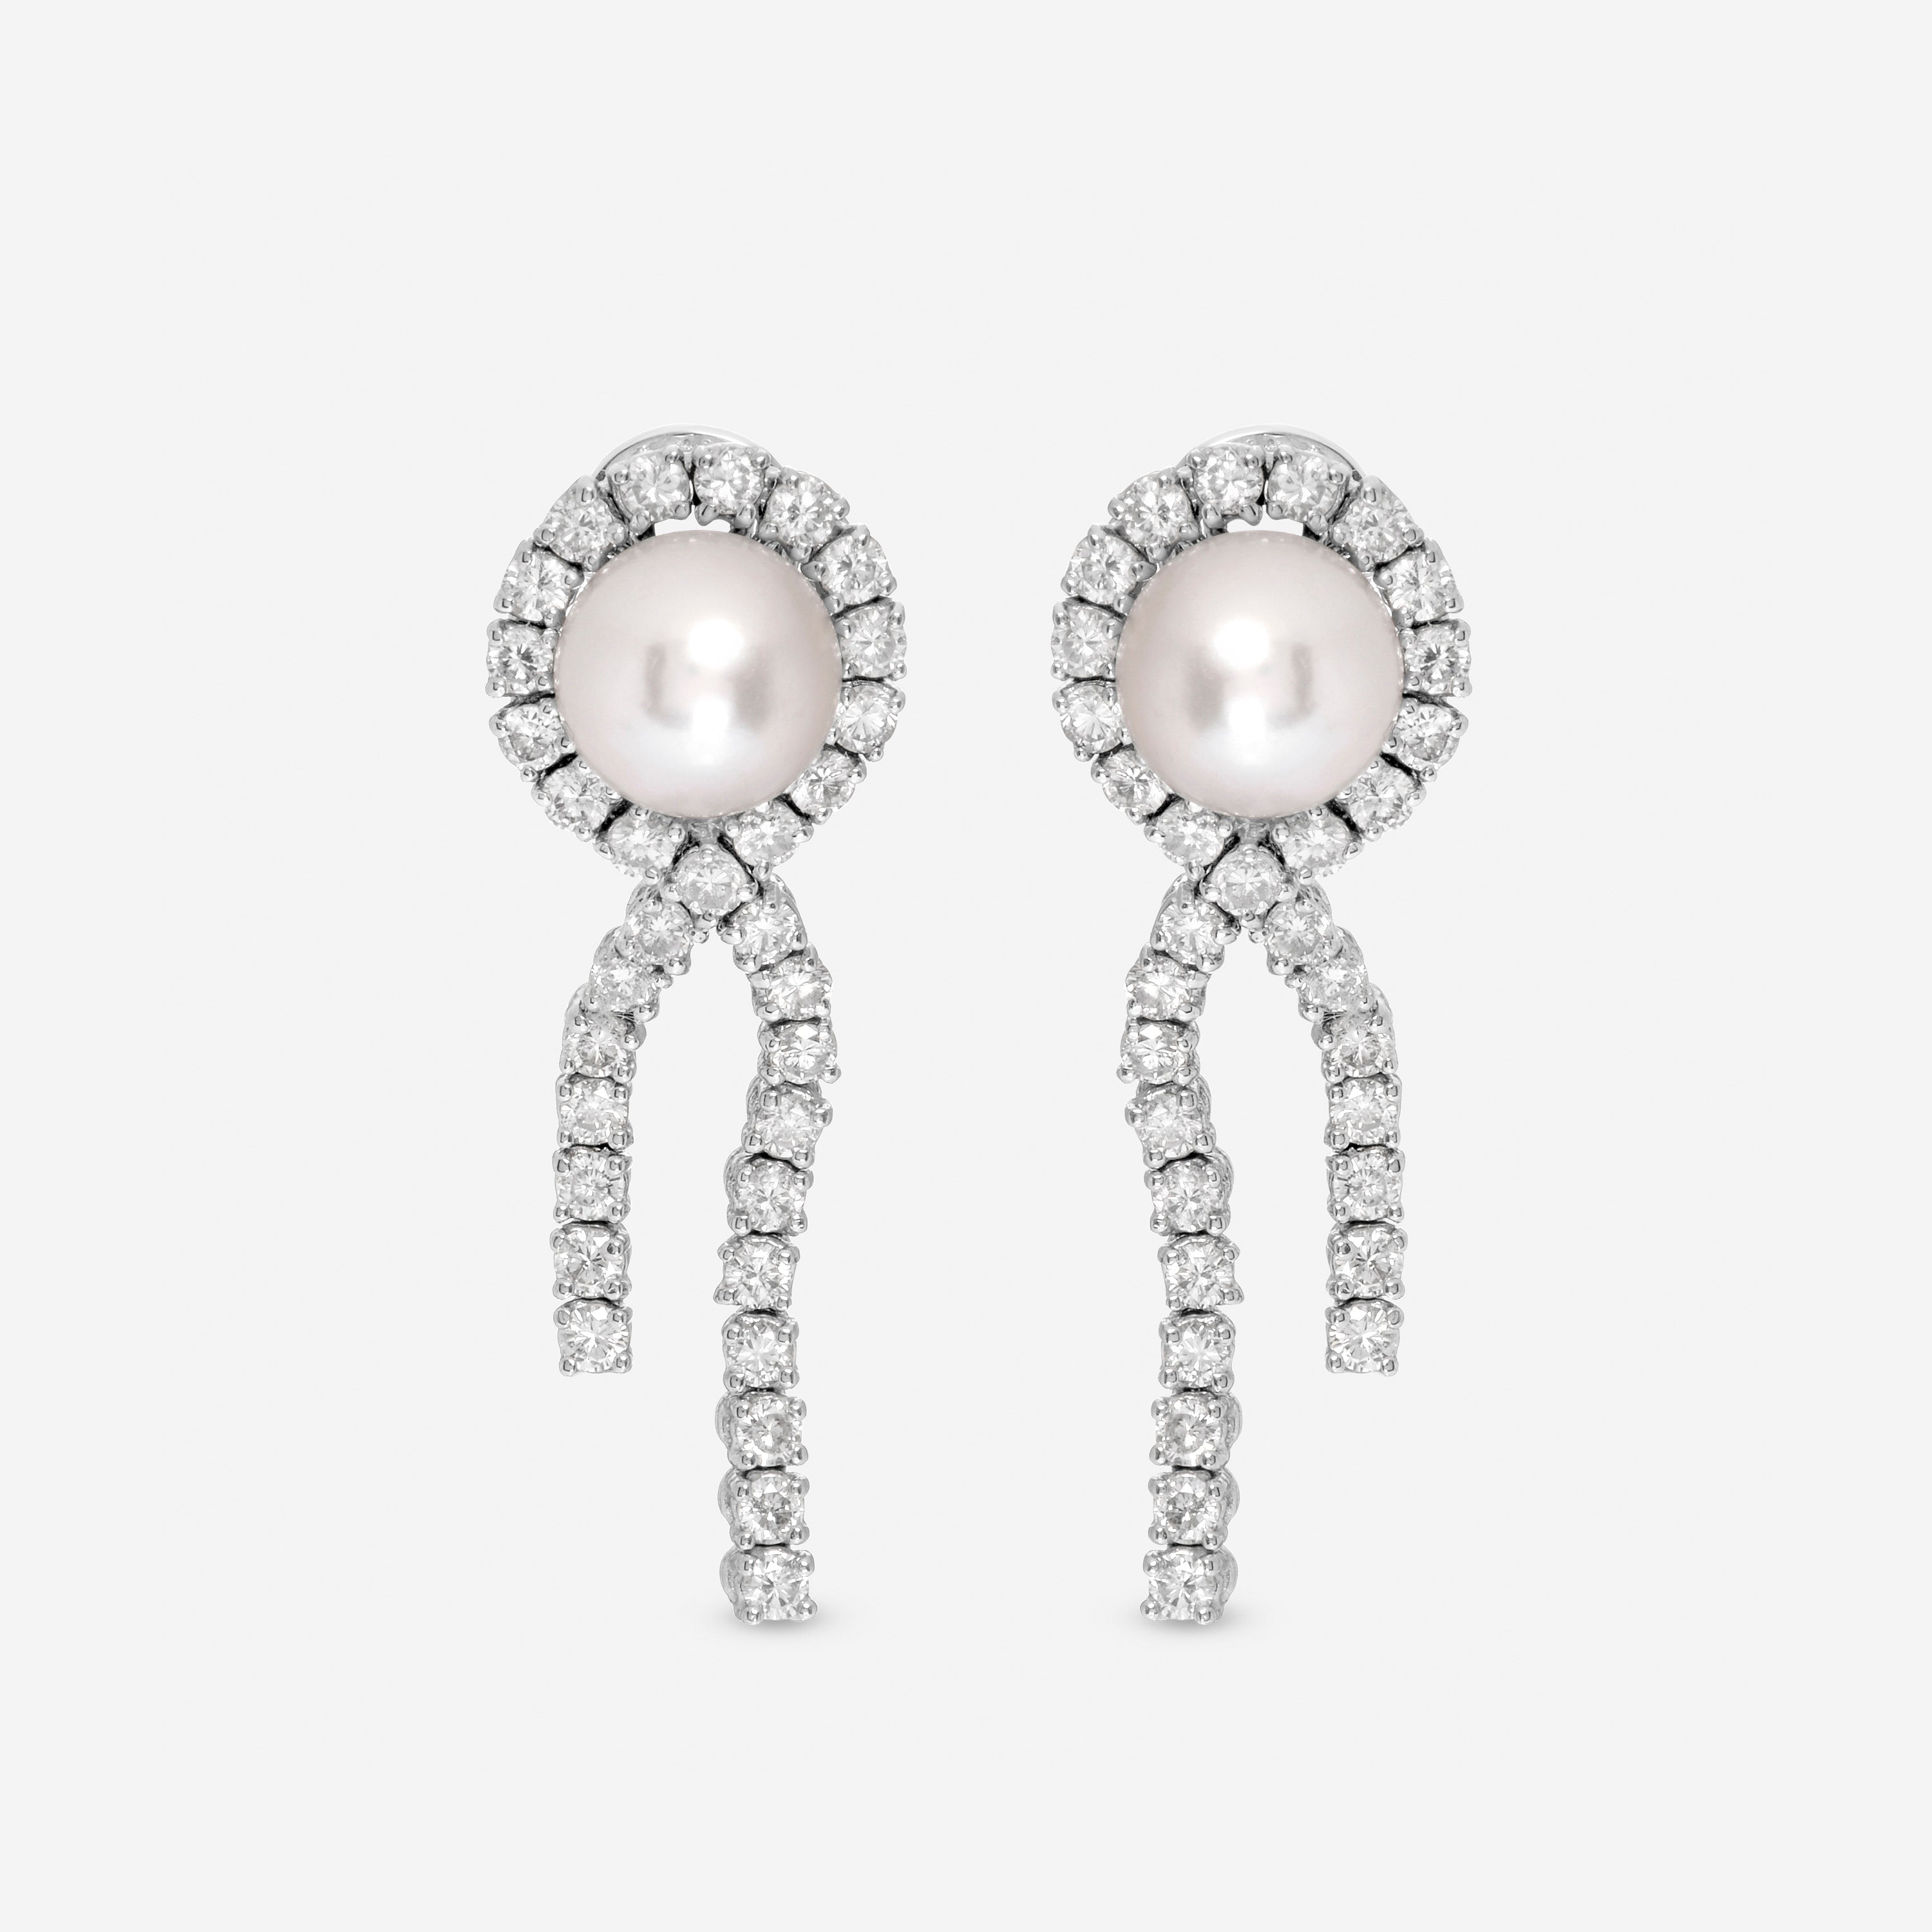 SuperOro 18K White Gold, Diamond 3.67ct. tw. and Pearl Drop Earrings 61614